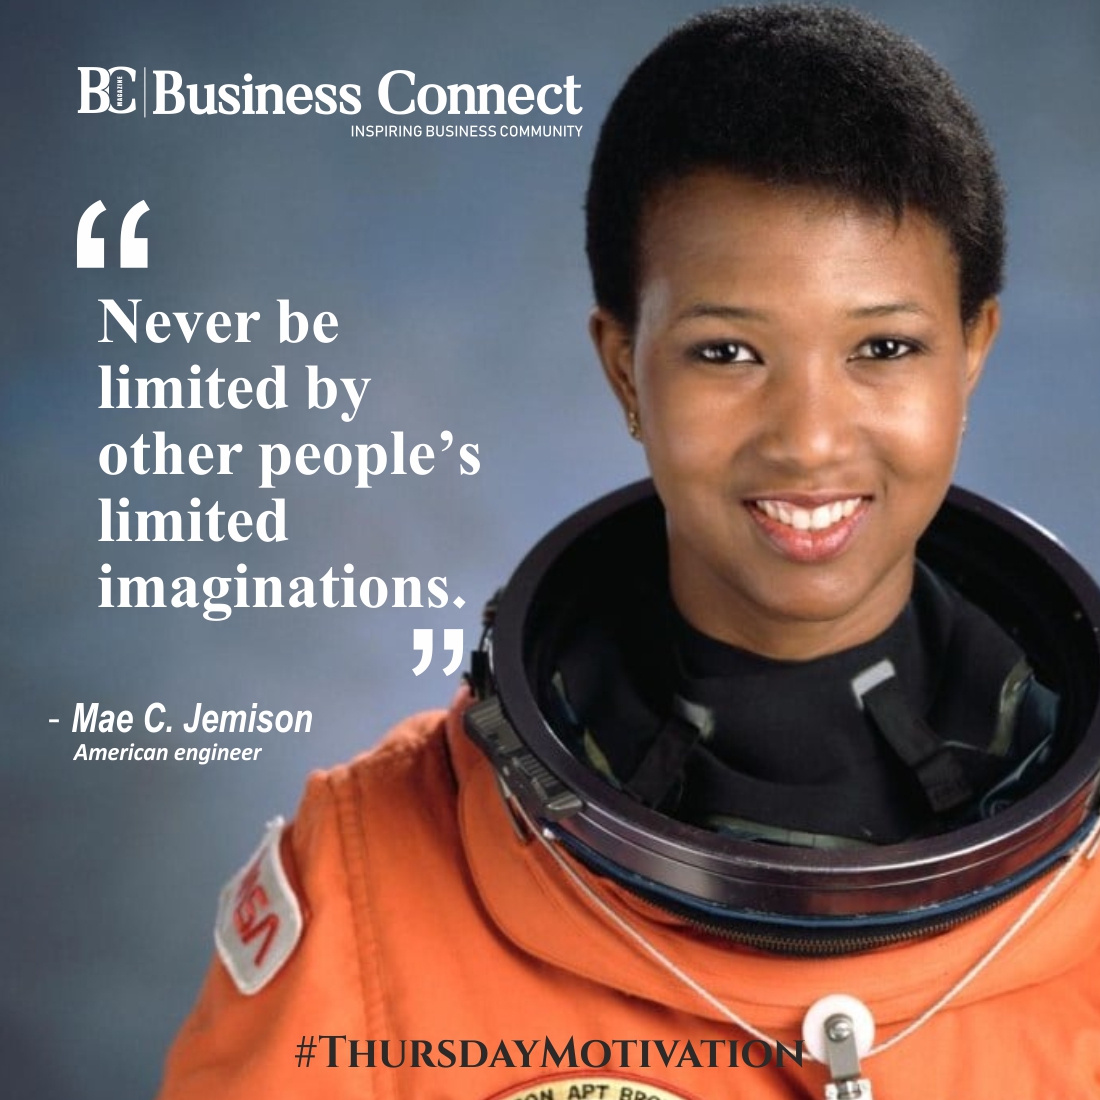 'Never be limited by other people’s limited imaginations.'- Dr. Mae Jemison

#quote #quotes #thursday #morning #today #morningvibe #quotesoftheday #quotesdaily #motivationquote #SwatiMaliwal #FavouriteIPL #SunilChhetri #todayquote #motivationdaily #motivatonvibes #quotesaboutlife